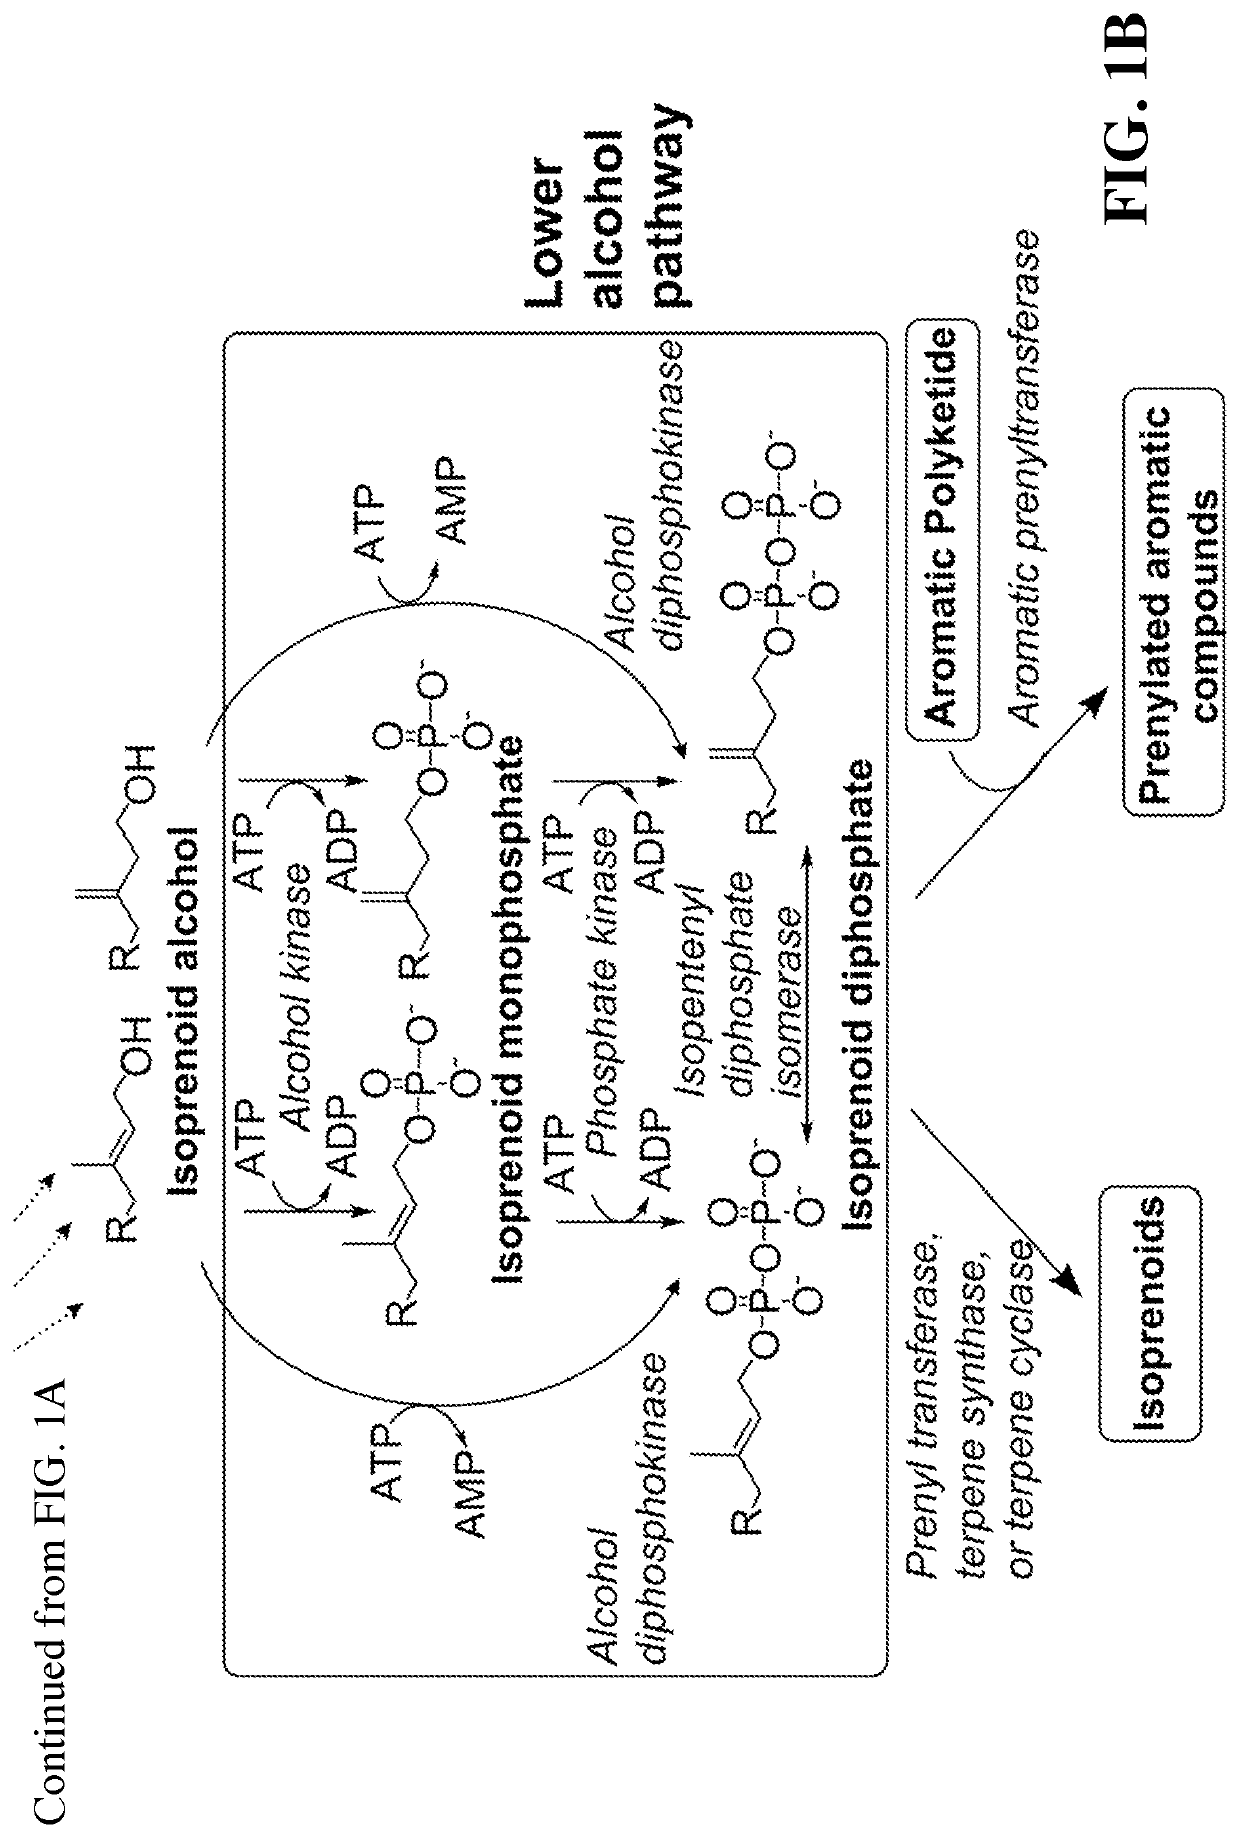 Microbial synthesis of isoprenoid precursors, isoprenoids and derivatives including prenylated aromatic compounds